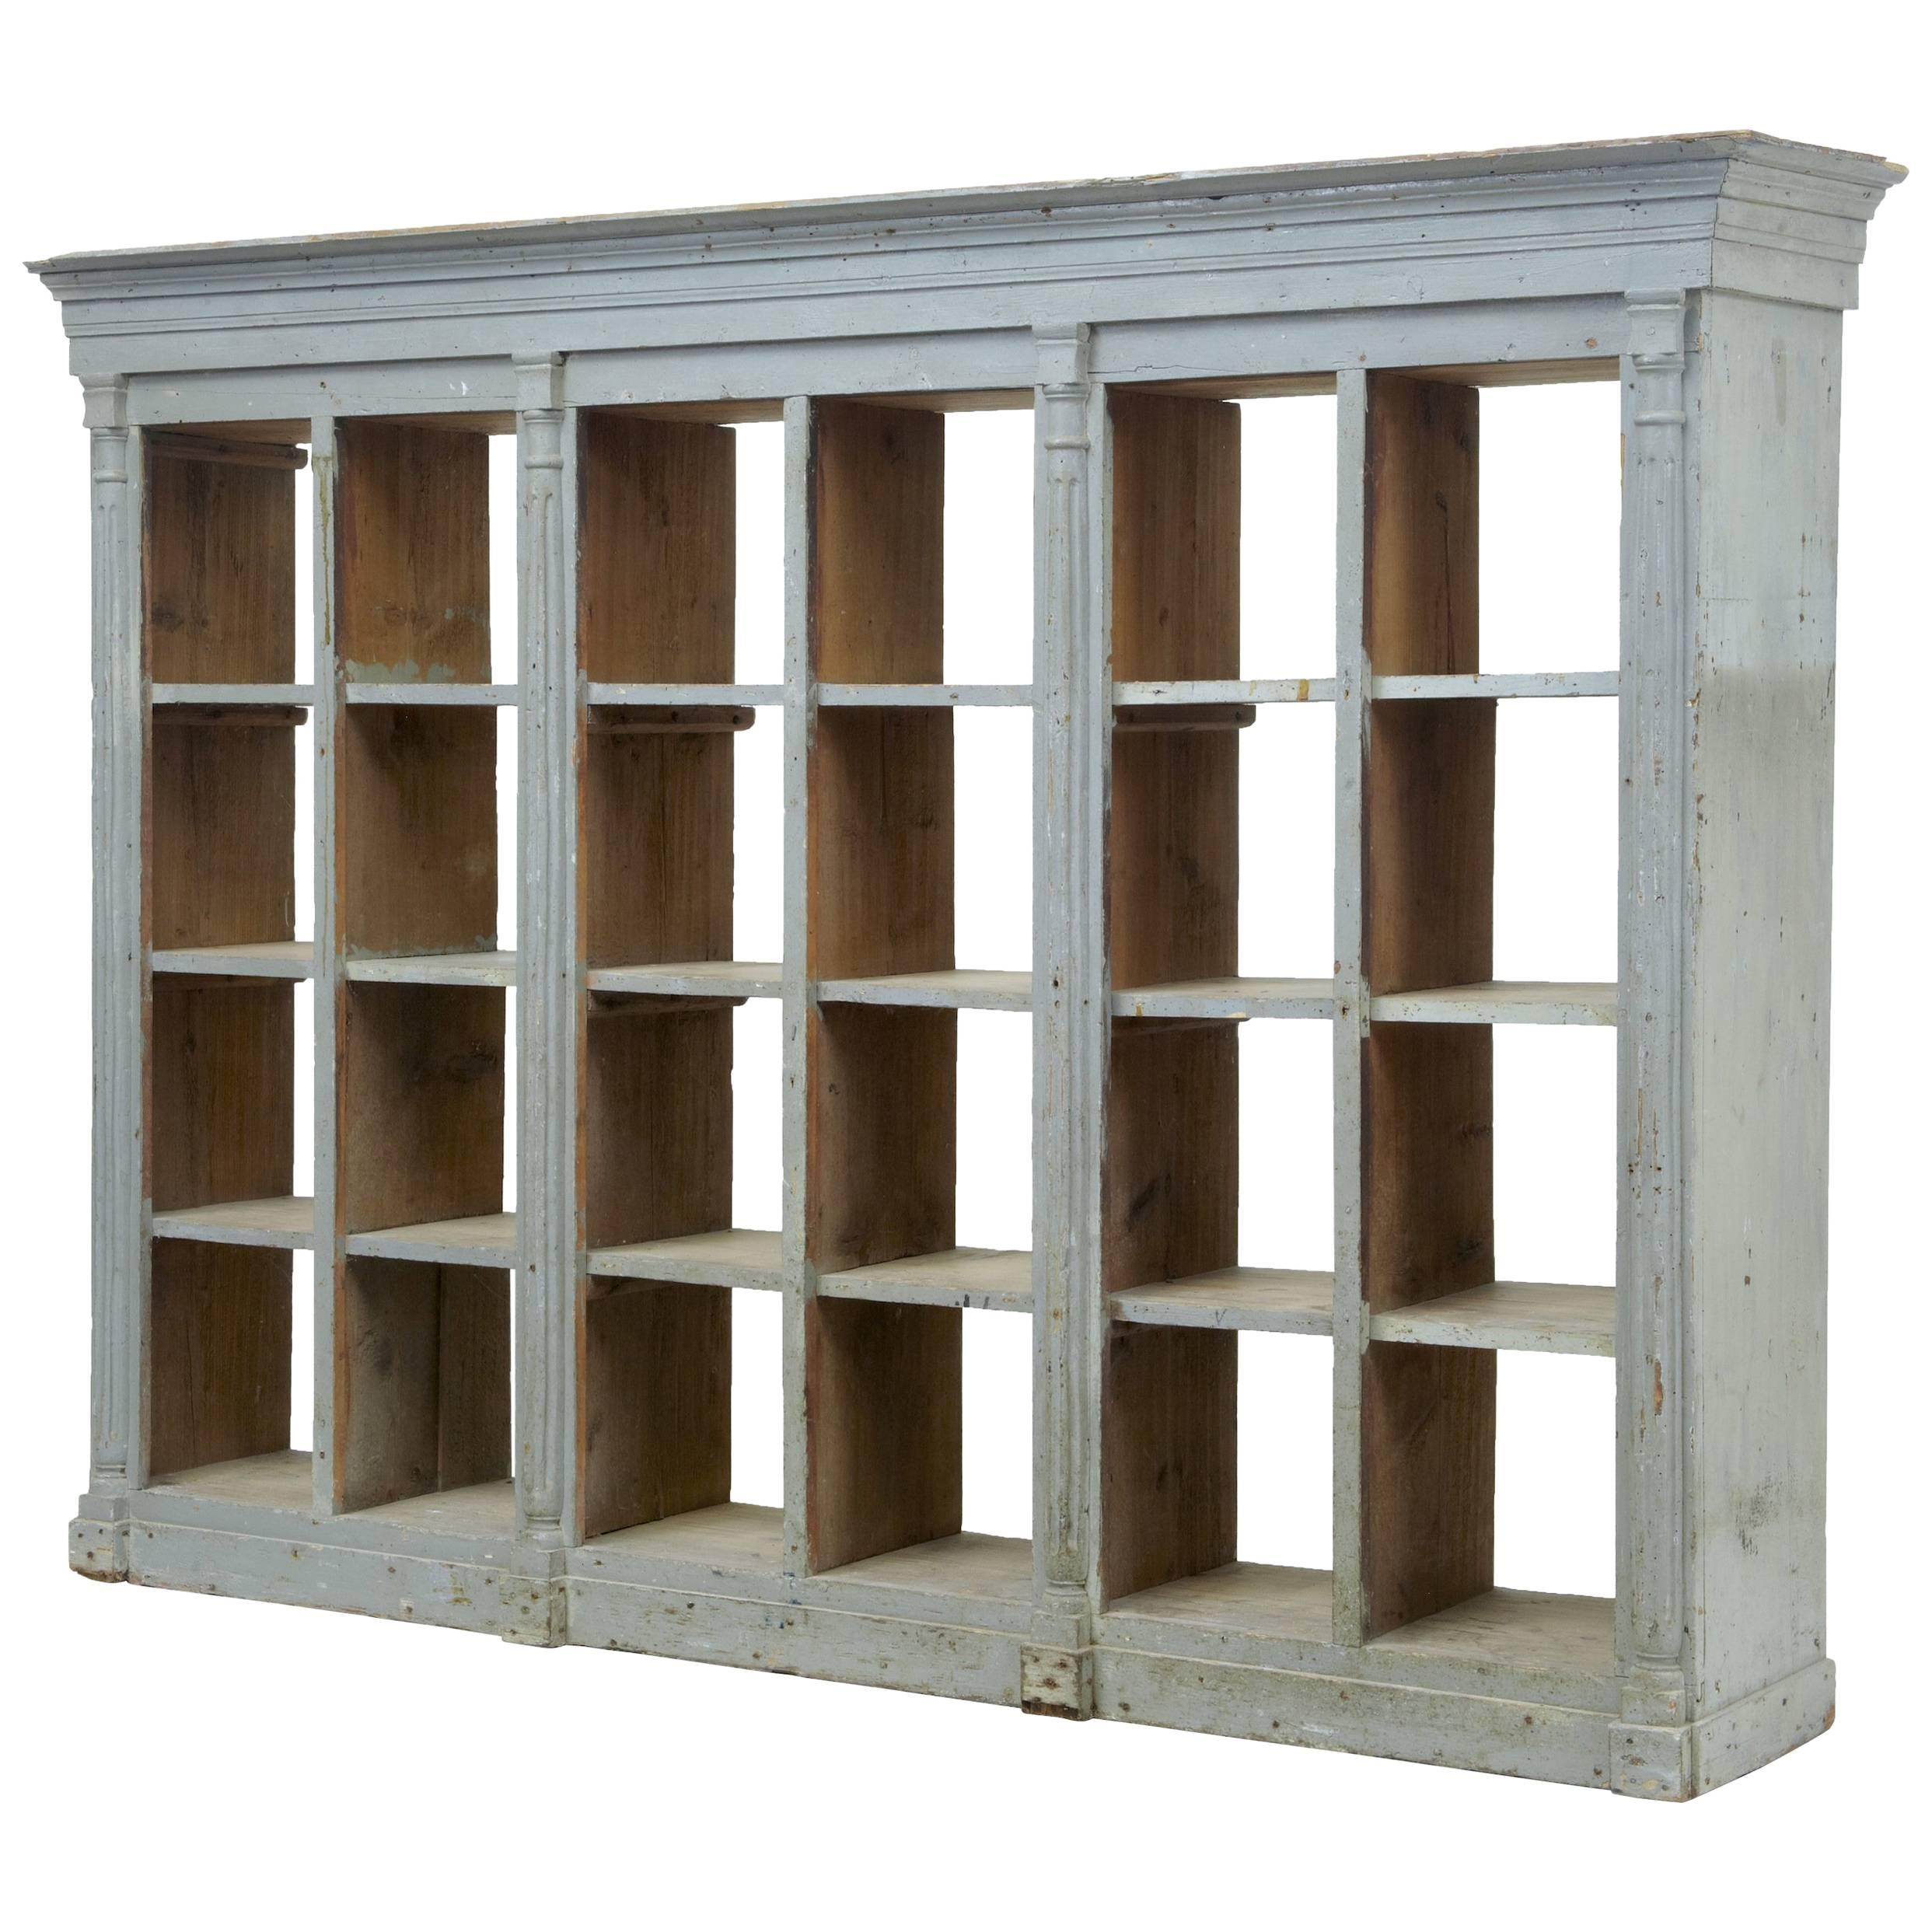 19th Century Architectural Painted Pine Shelving Cabinet